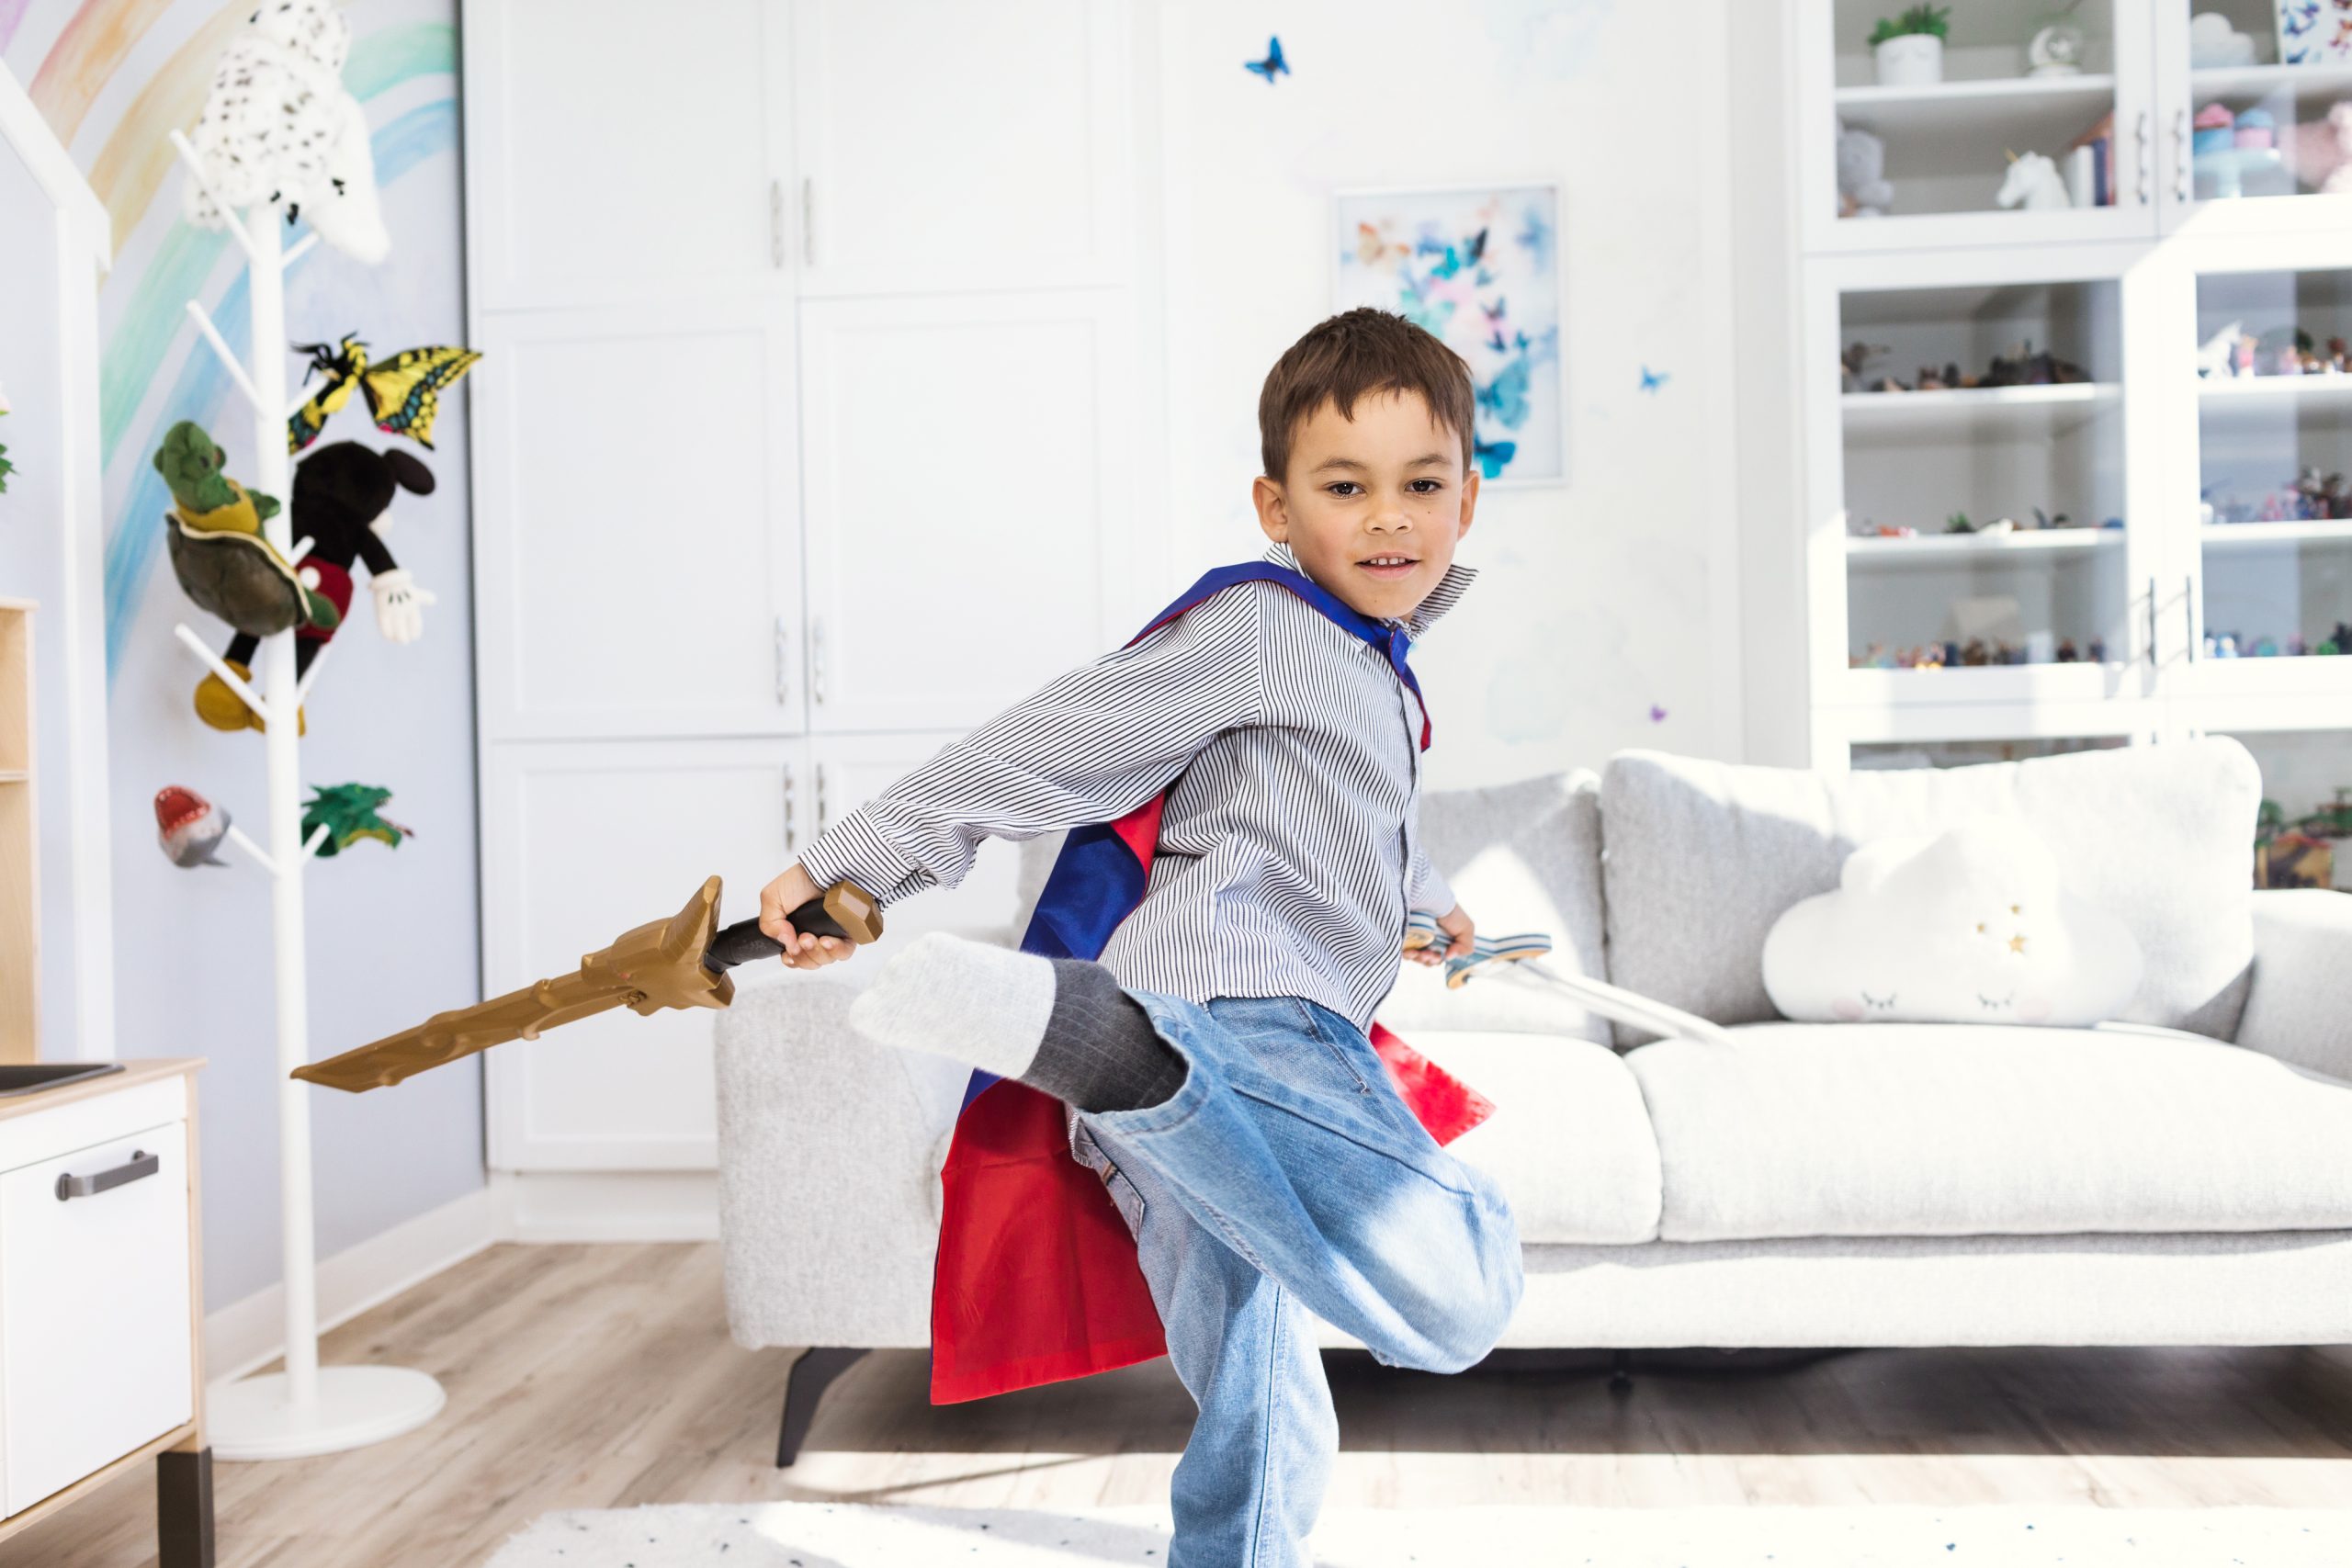 A child, wearing a red and blue cape, brandishes a plastic sword, while skillfully performing a turnkick